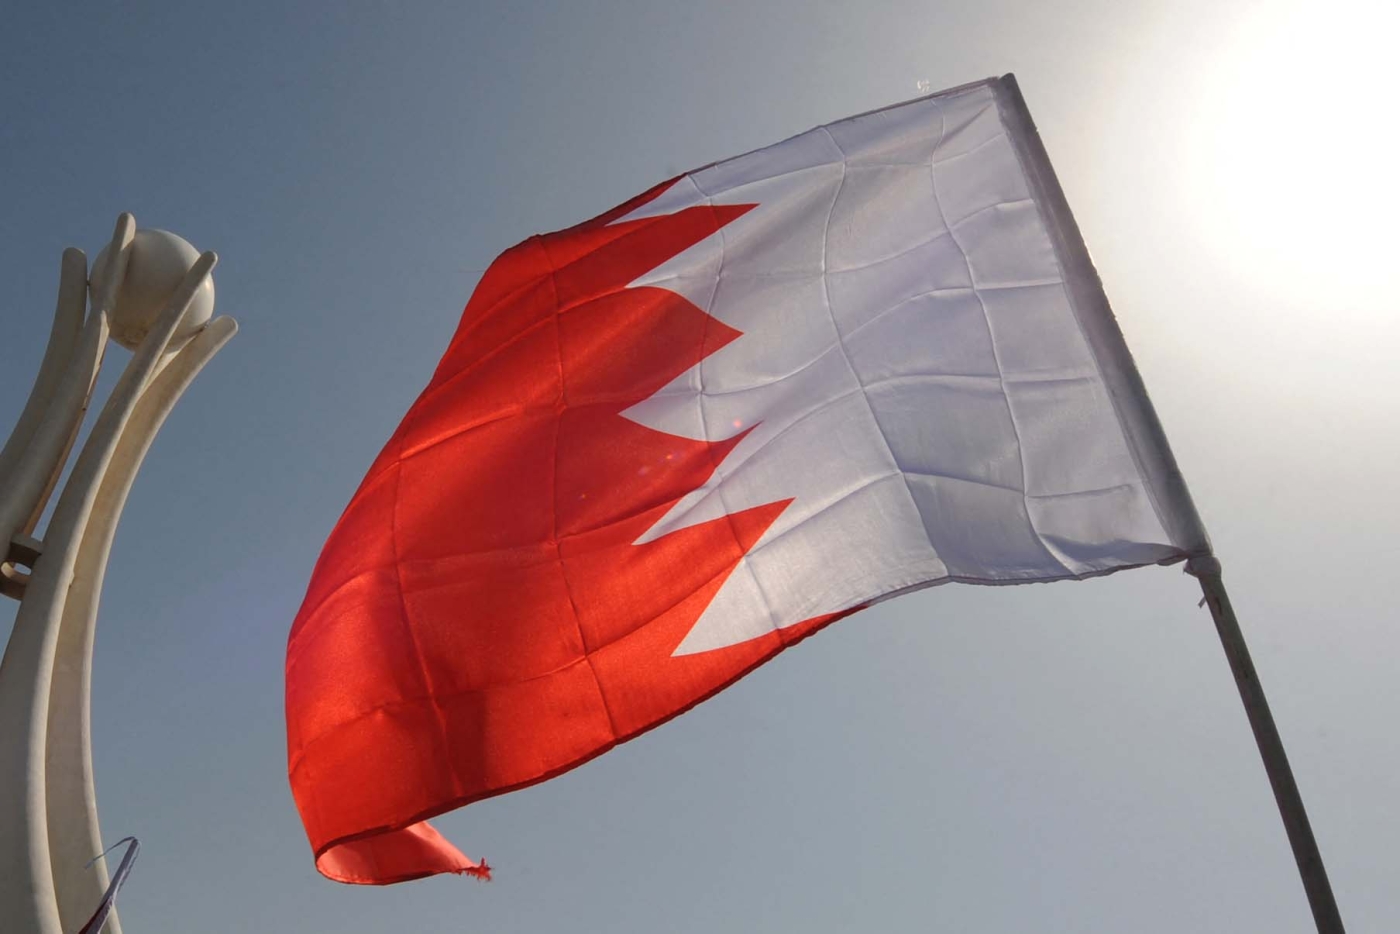 Bahrain has launched a comprehensive crackdown on opposition groups and human rights activists.